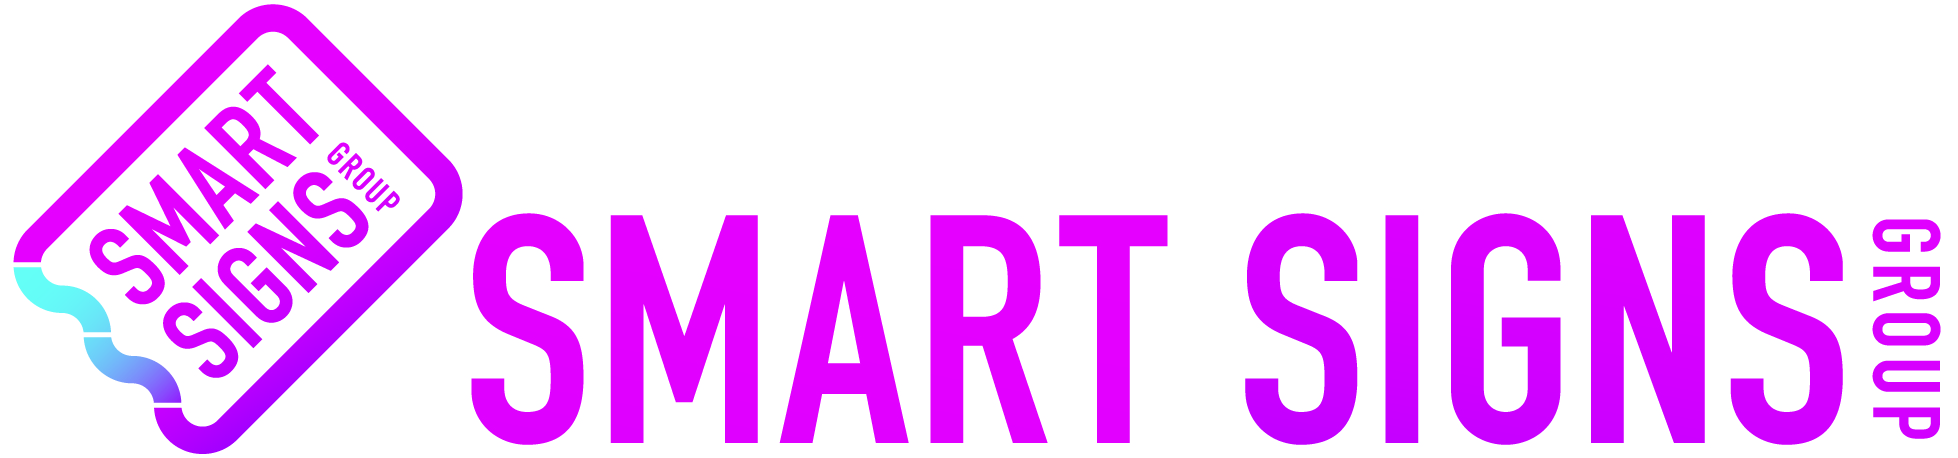 Smart Signs Group